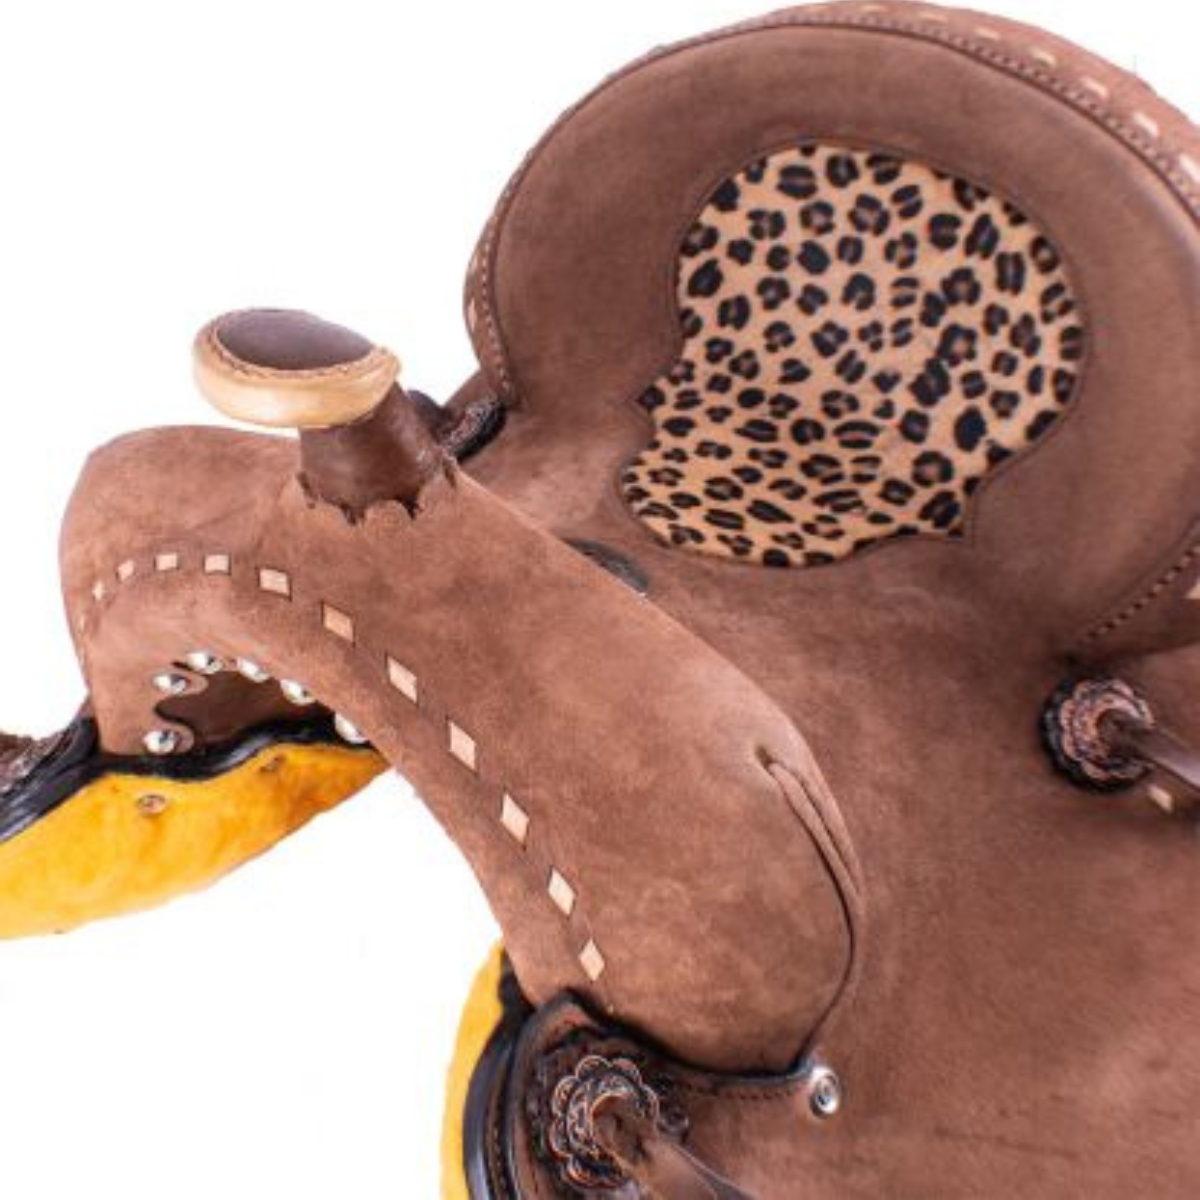 13" DOUBLE T YOUTH HARD SEAT BARREL SADDLE WITH CHEETAH SEAT - Double T Saddles